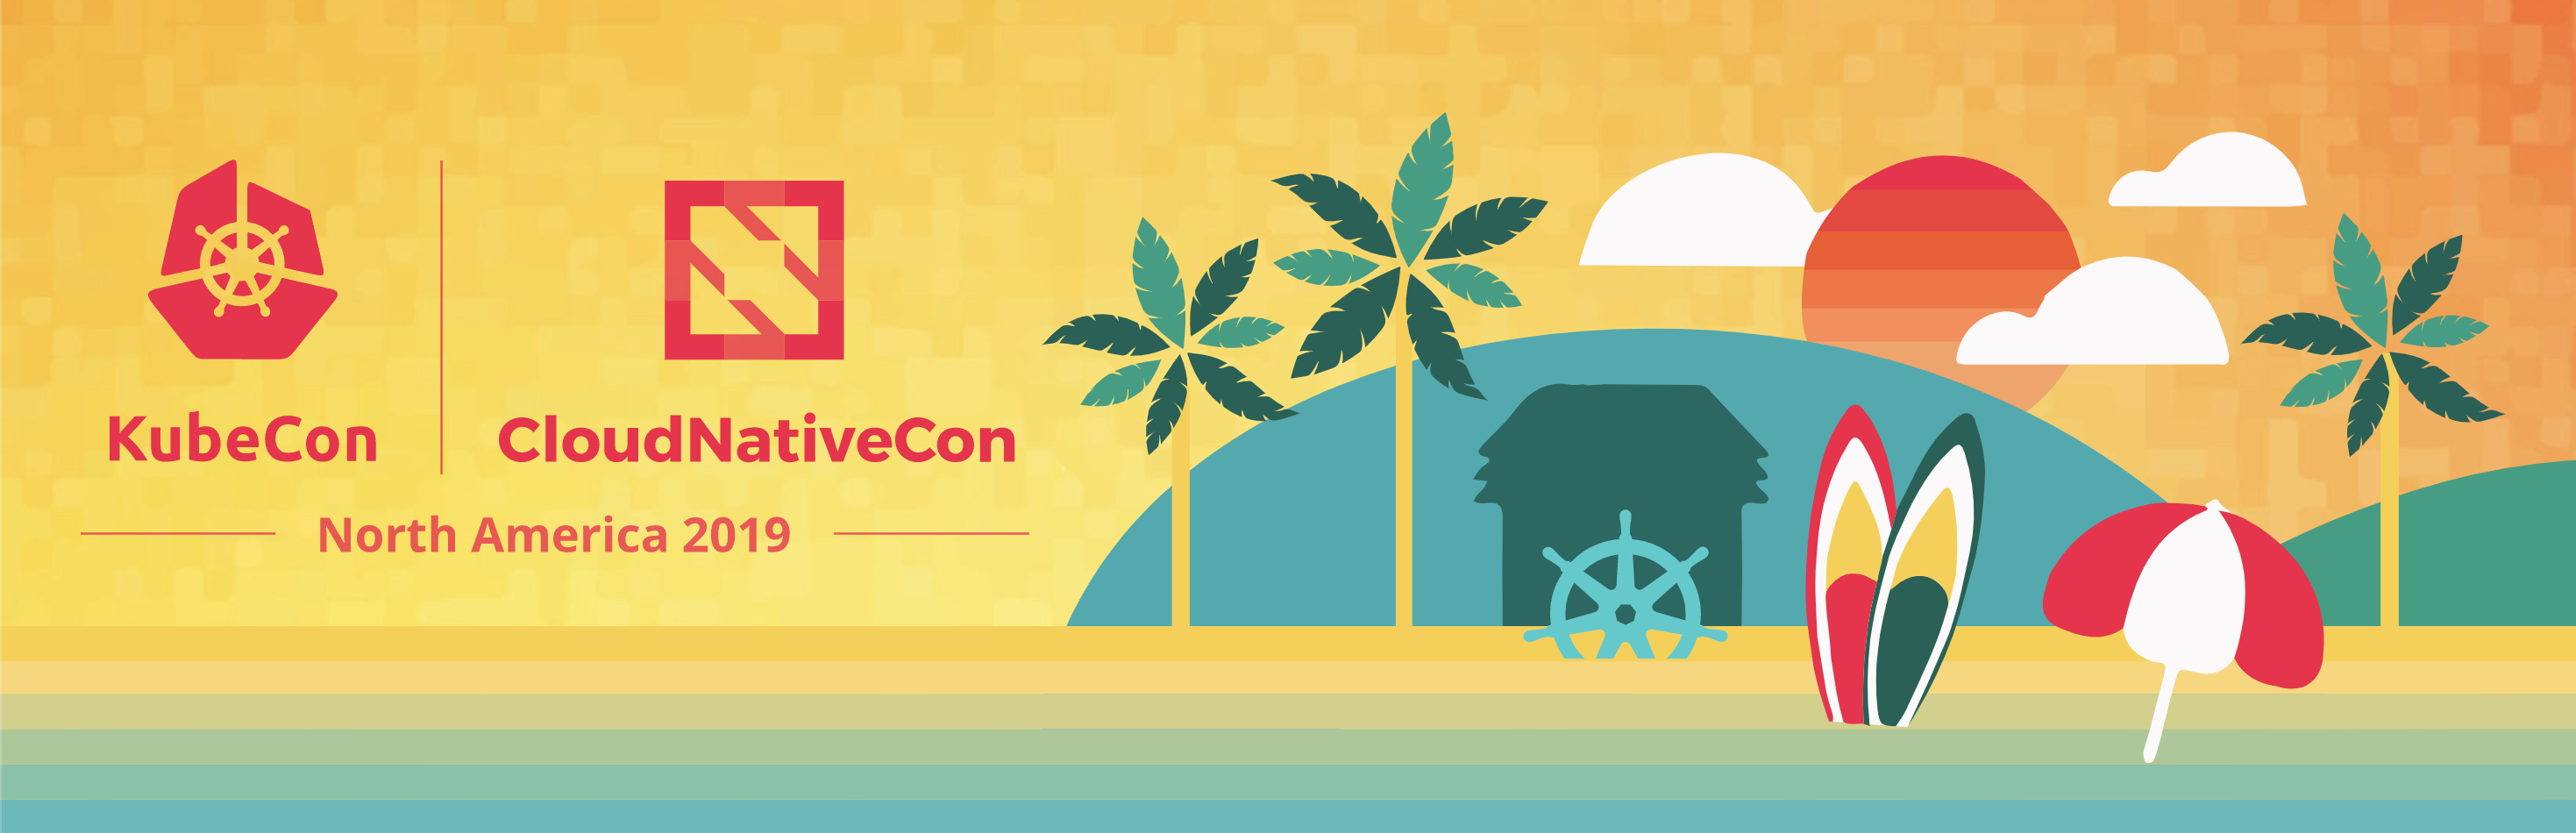 Our Top Highlights From KubeCon + CloudNativeCon San Diego 2019